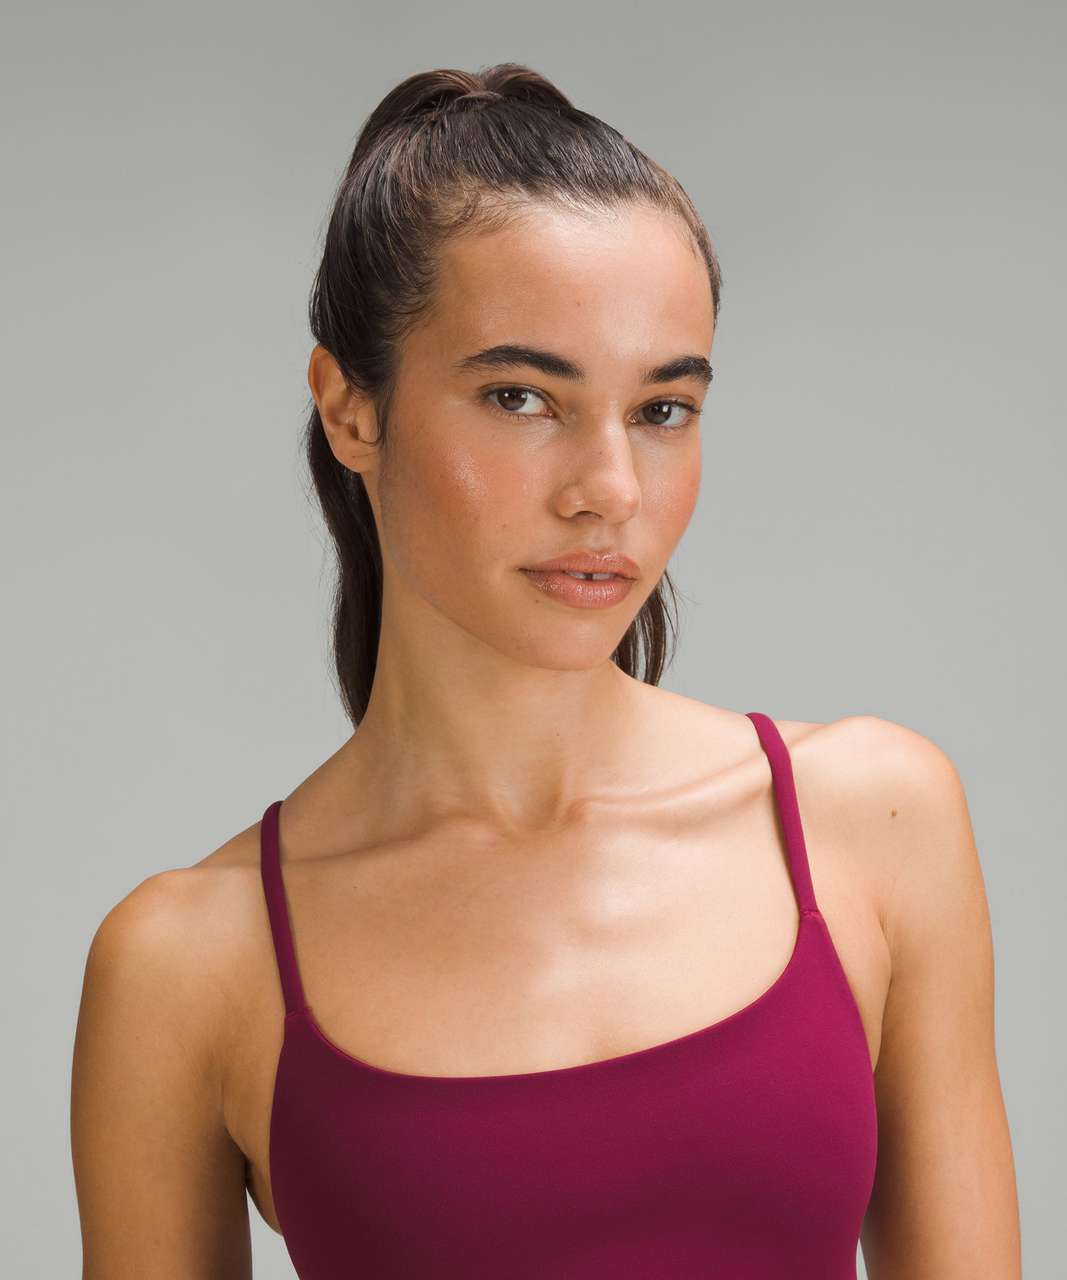 Lululemon Wunder Train Strappy Racer Bra *Light Support, A/B Cup - Deep Luxe